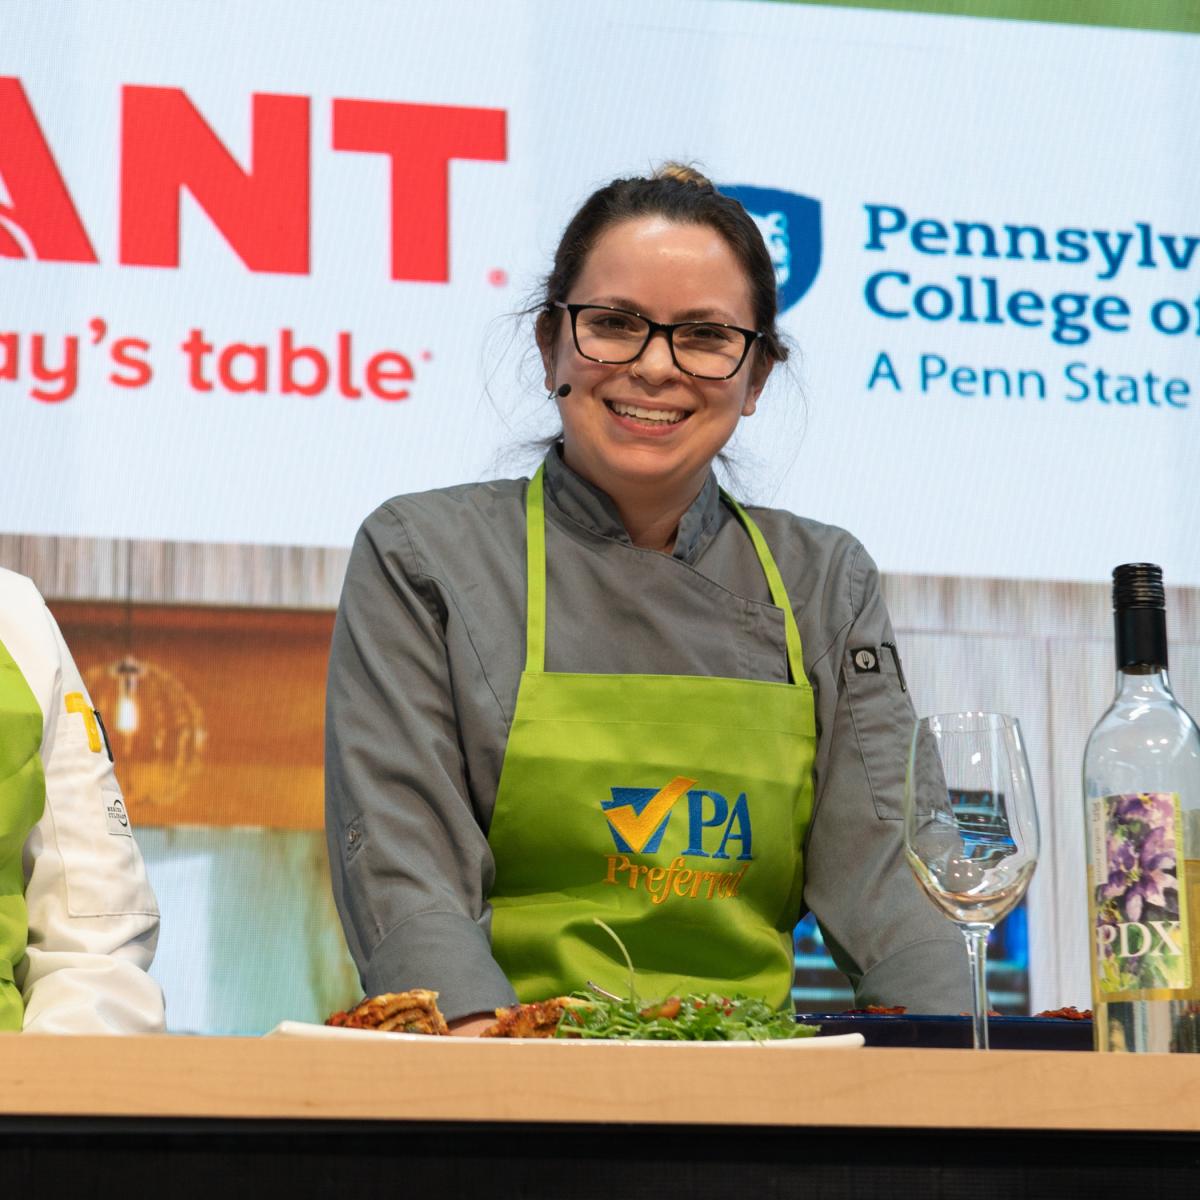 Kristina Wisneski, a Pennsylvania College of Technology culinary arts graduate, Food Network “Chopped” champion and sous chef at Pure Roots Provisions in King of Prussia, takes the stage at the 2023 Pennsylvania Farm Show. She will return to the college to mentor students in preparing the April 14 Visiting Chef dinner. (Photo by Kat Kuo for the 2023 PA Preferred® Culinary Connection at the Pennsylvania Farm Show)